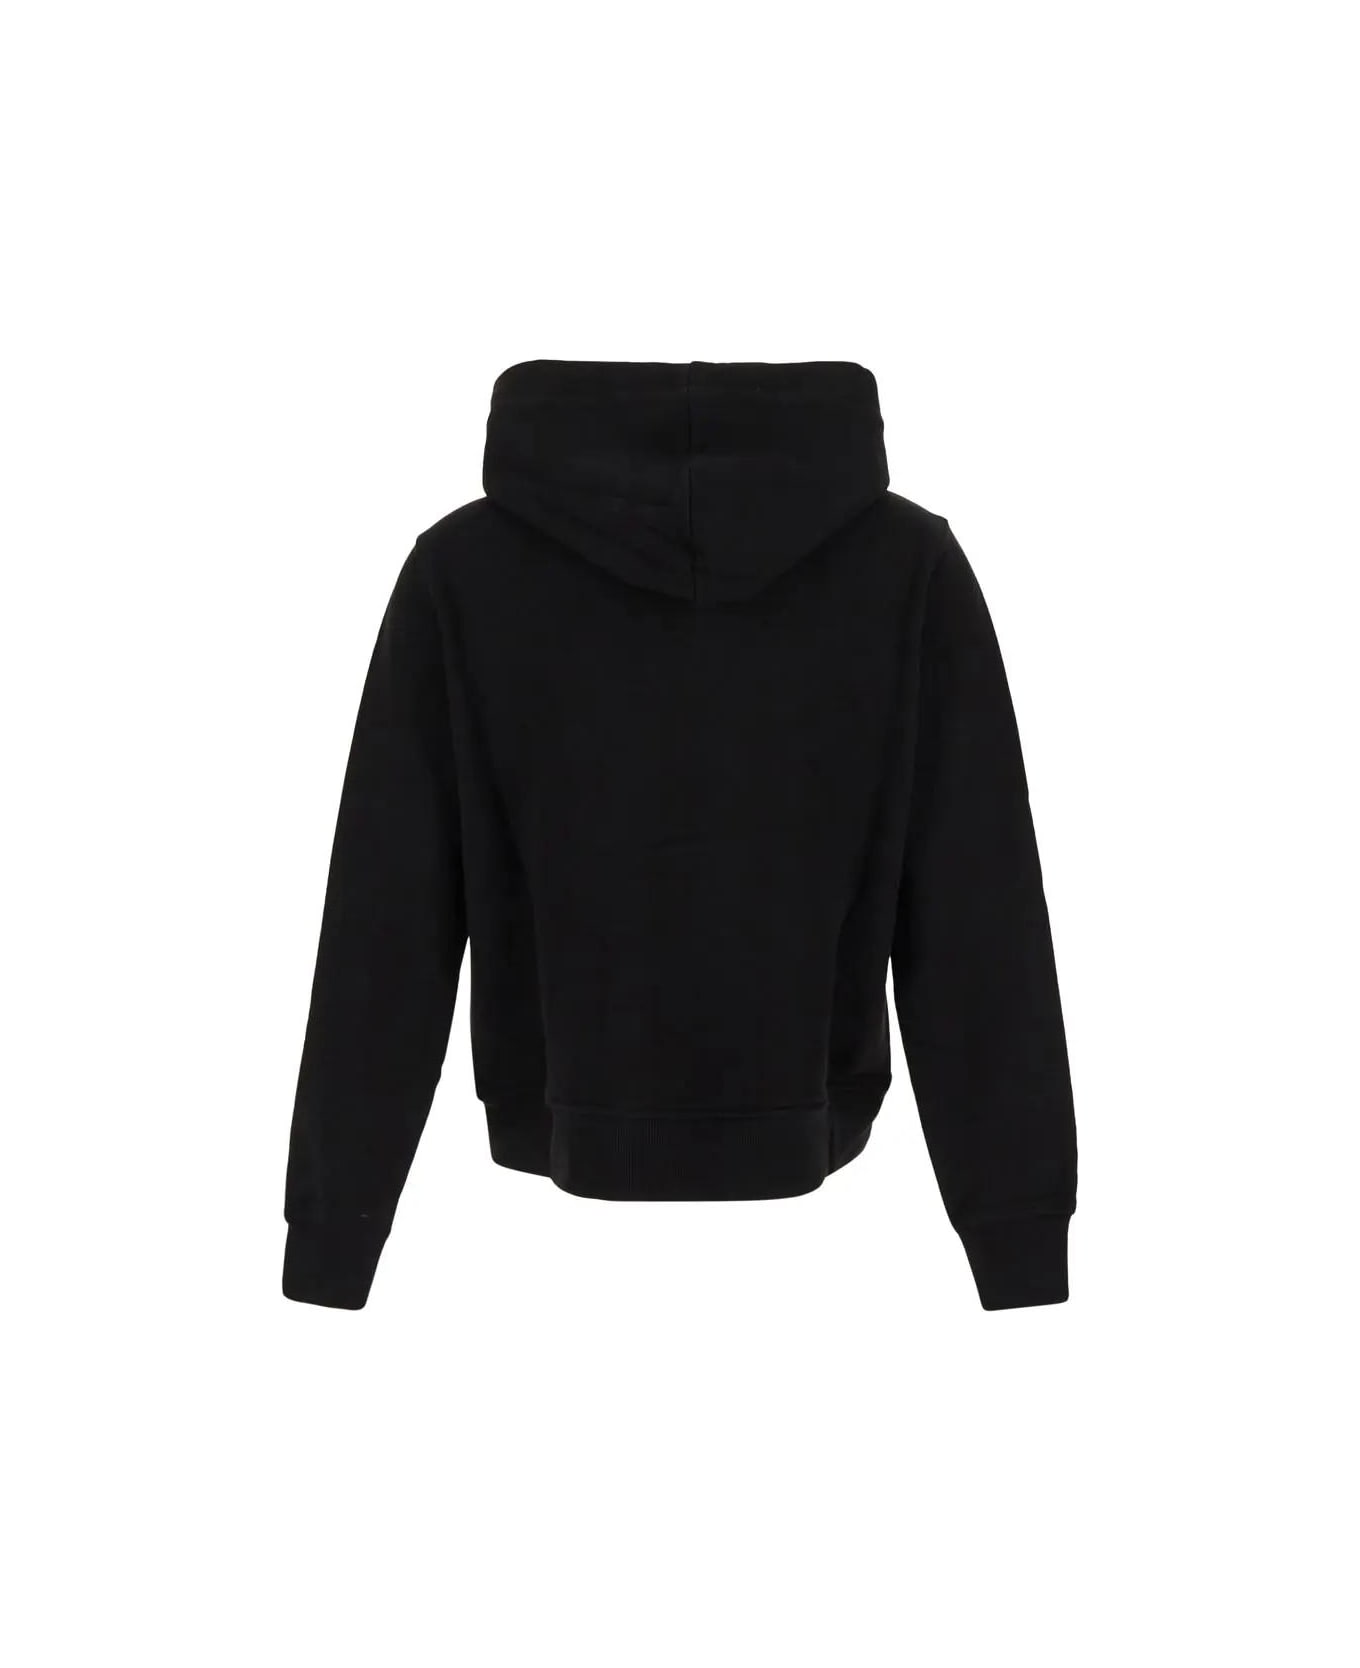 Versace Jeans Couture Logo Hoodie - Black